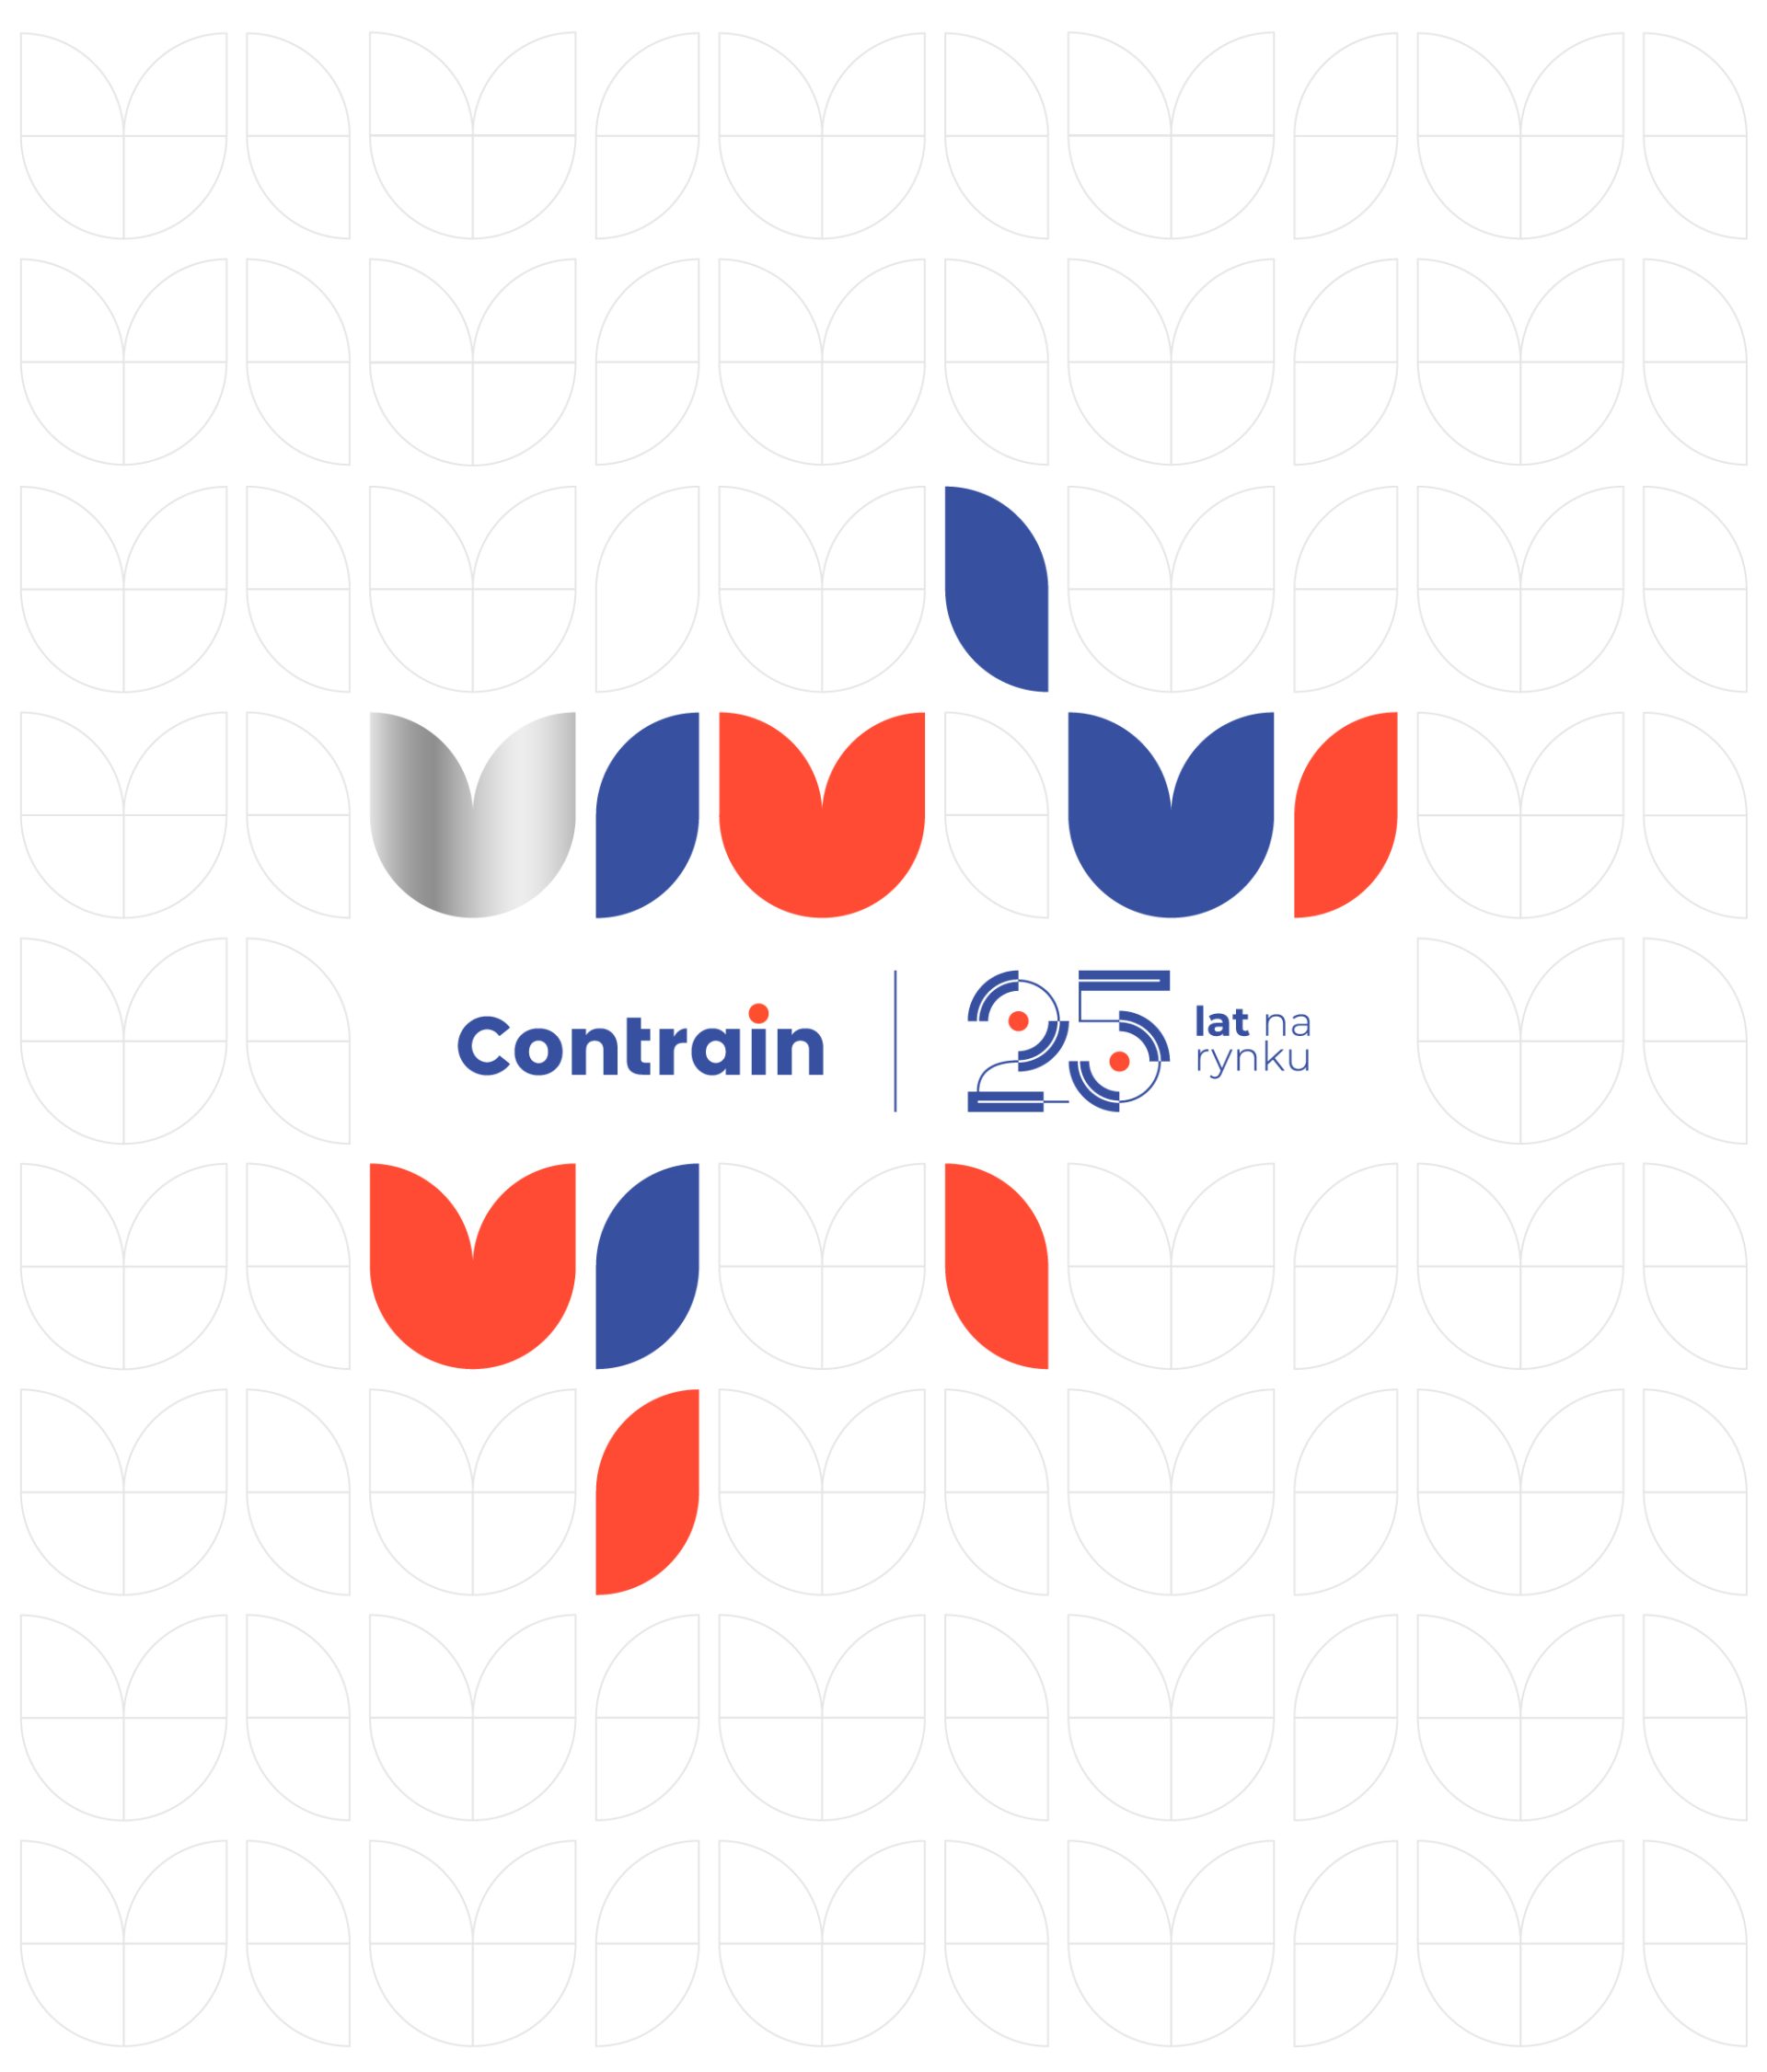 25 years of Contrain